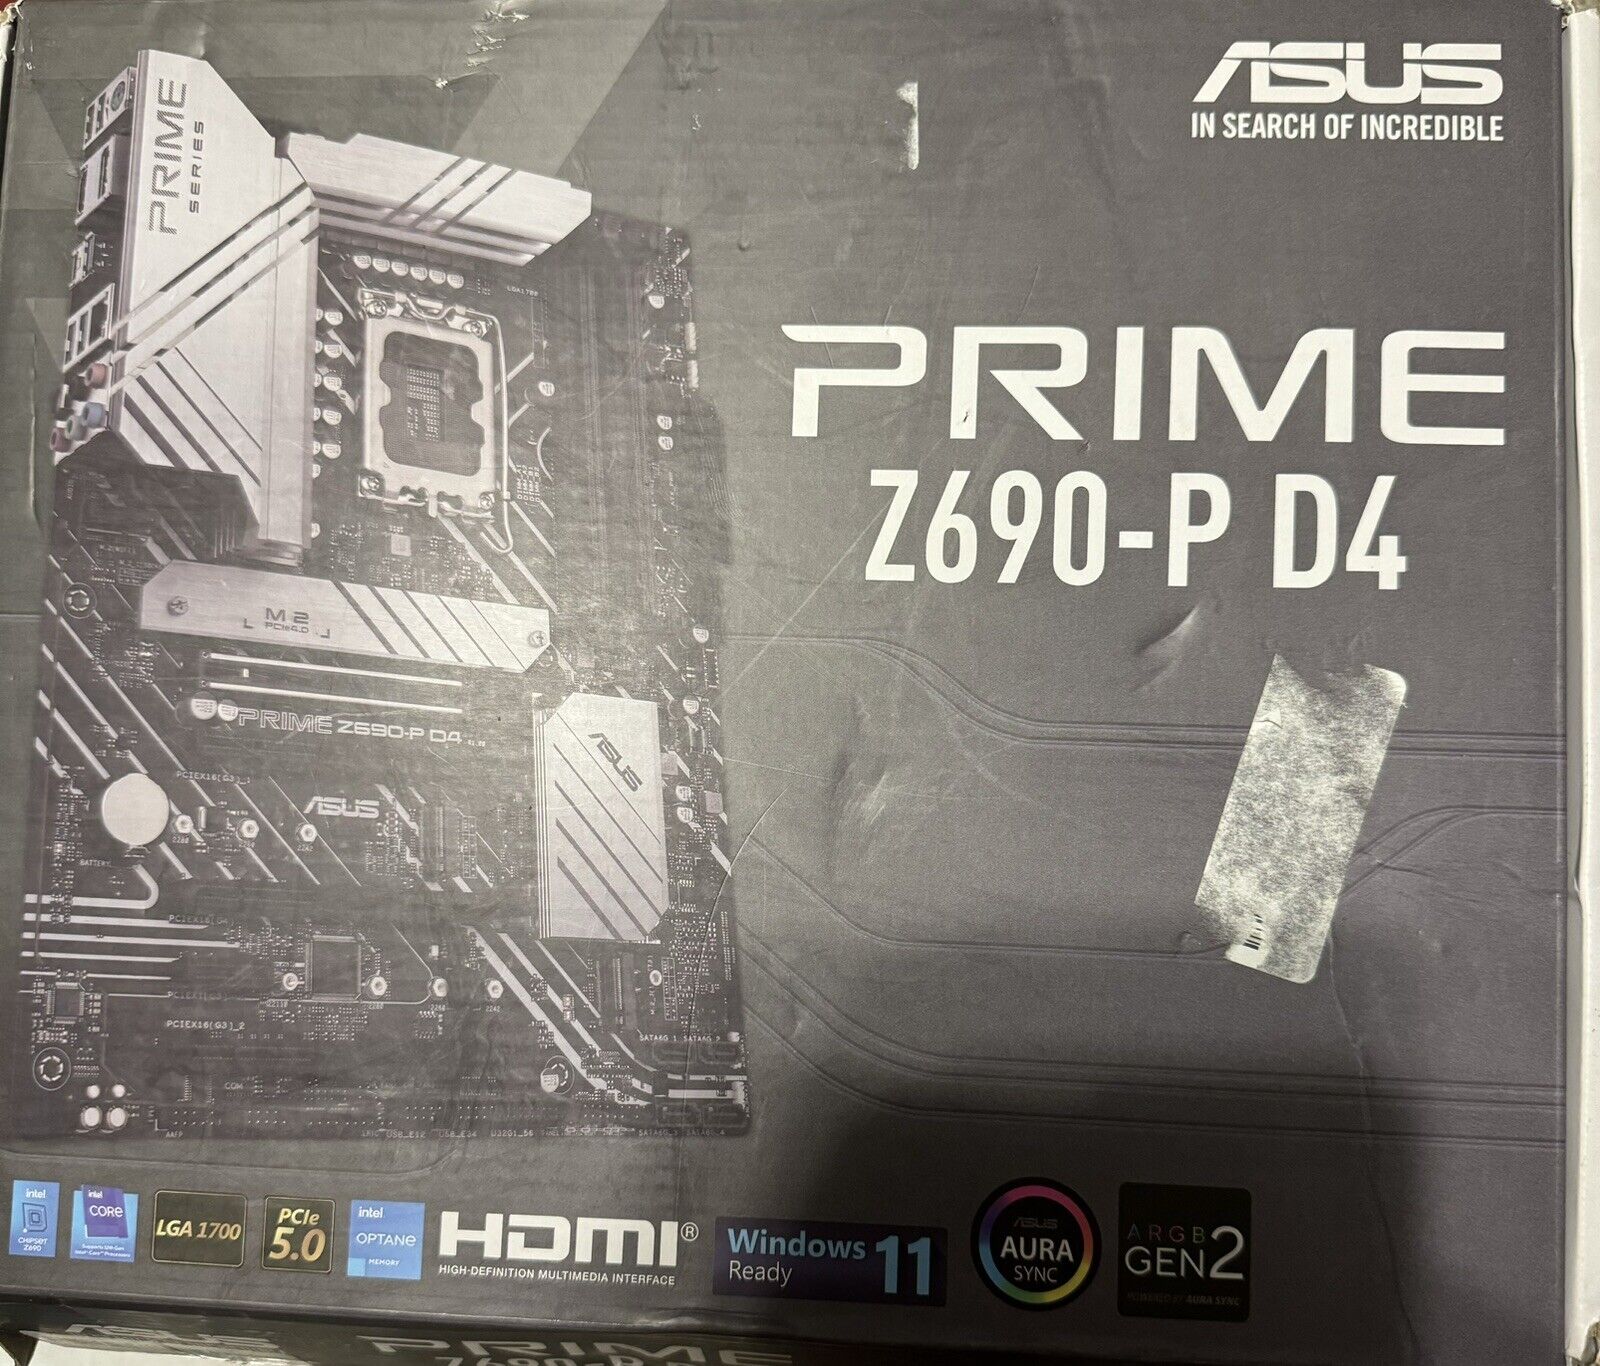 ASUS Prime Z690-P WiFi LGA1700 ATX Motherboard (PCIe 5,14+1 Power Stages,3X M.2.